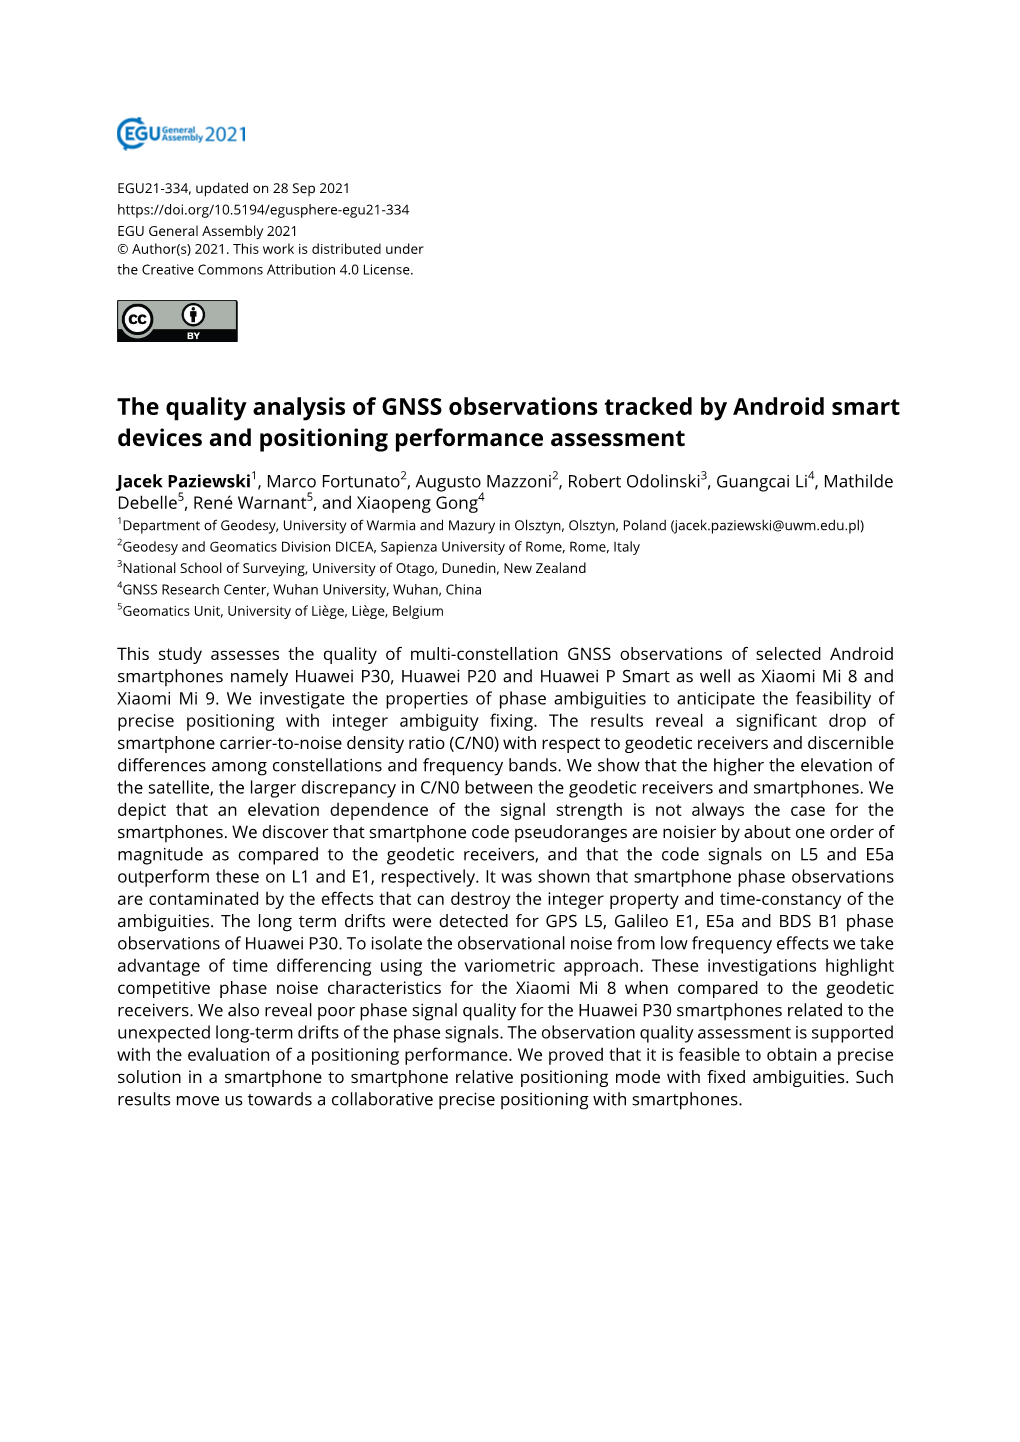 The Quality Analysis of GNSS Observations Tracked by Android Smart Devices and Positioning Performance Assessment